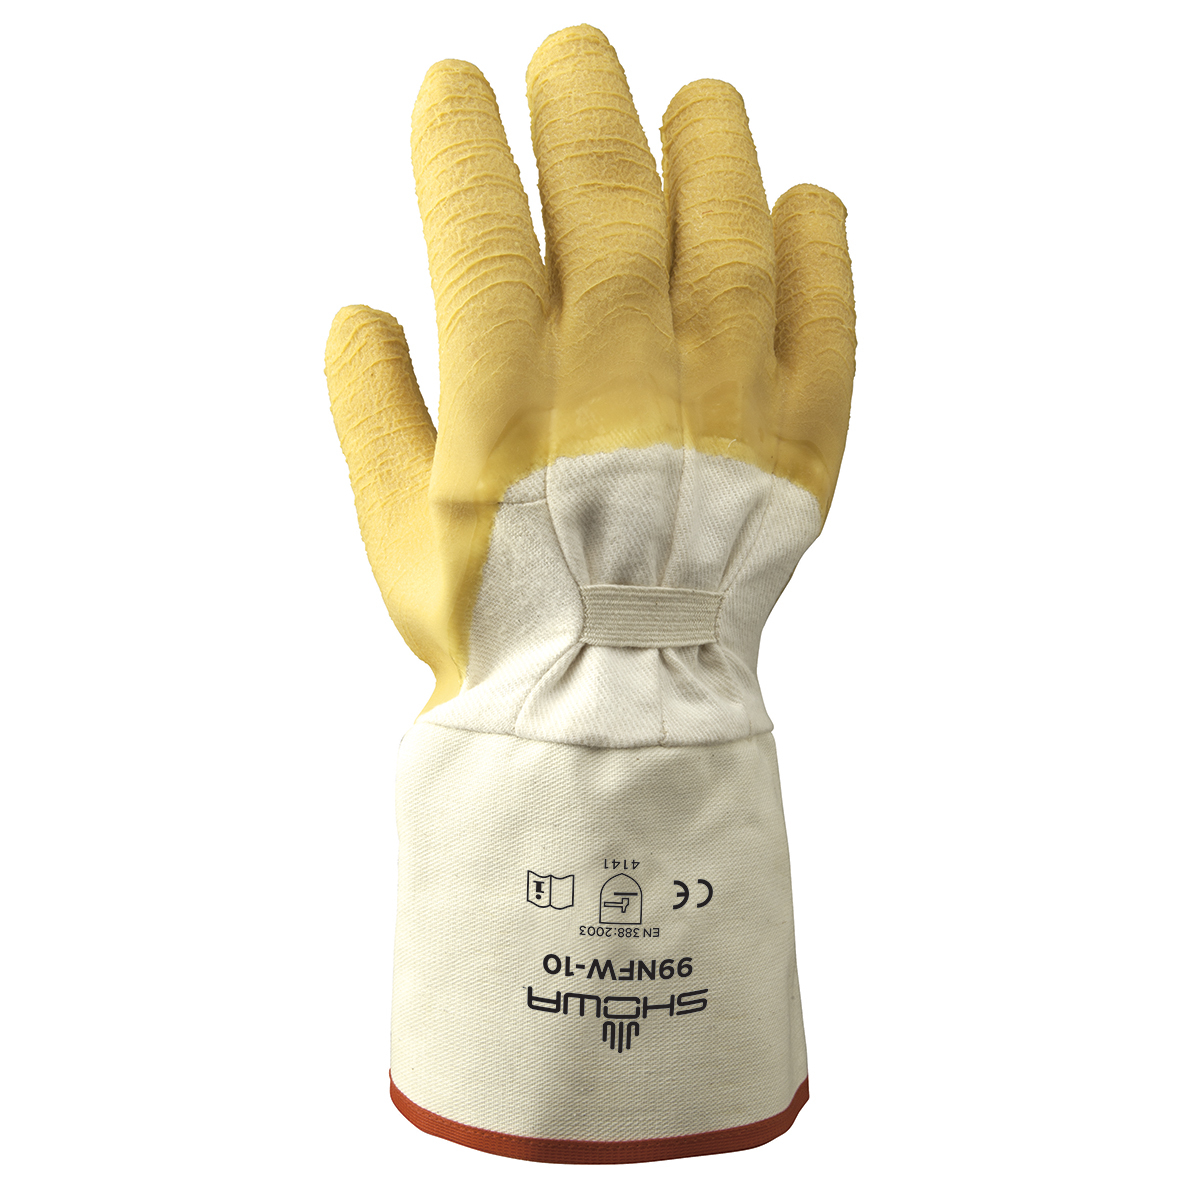 SHOWA® Size 11 SHOWA® Heavy Duty Natural Rubber Palm Coated Work Gloves With Cotton Liner And Gauntlet Cuff